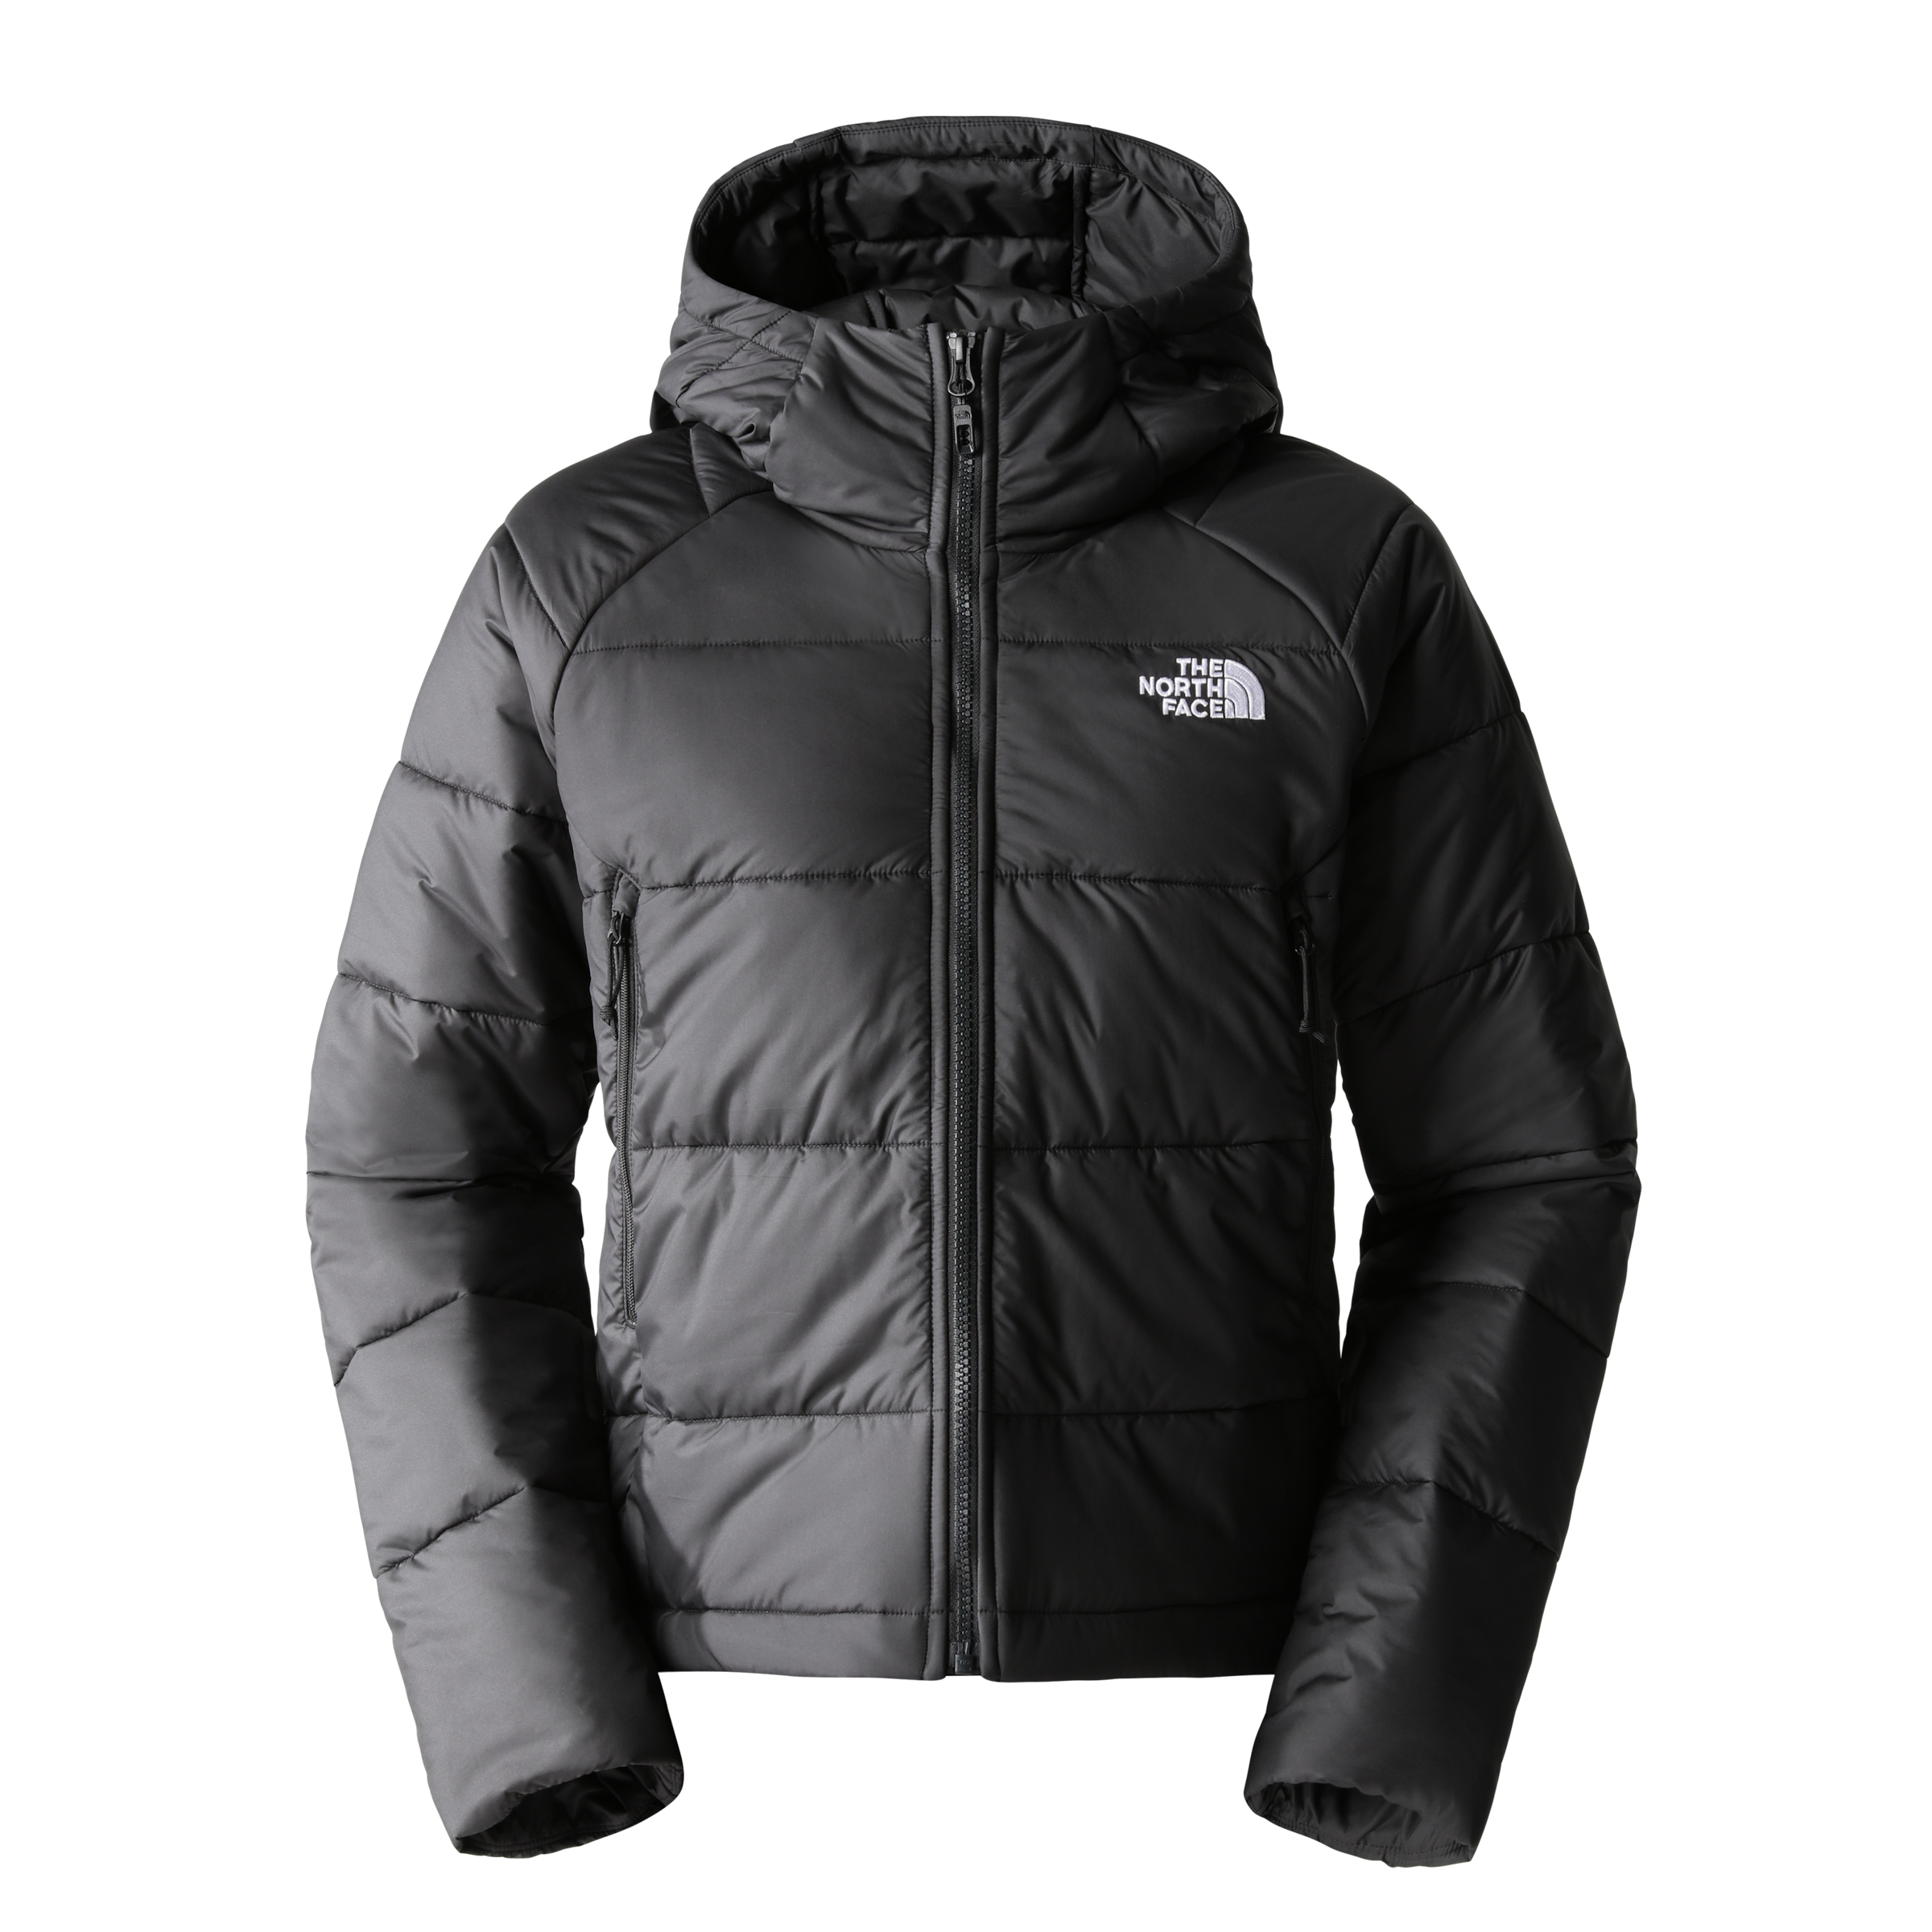 BAUR Funktionsjacke Face North Kapuze, mit The | »W HYALITE SYNTHETIC Logodruck HOODIE«, mit